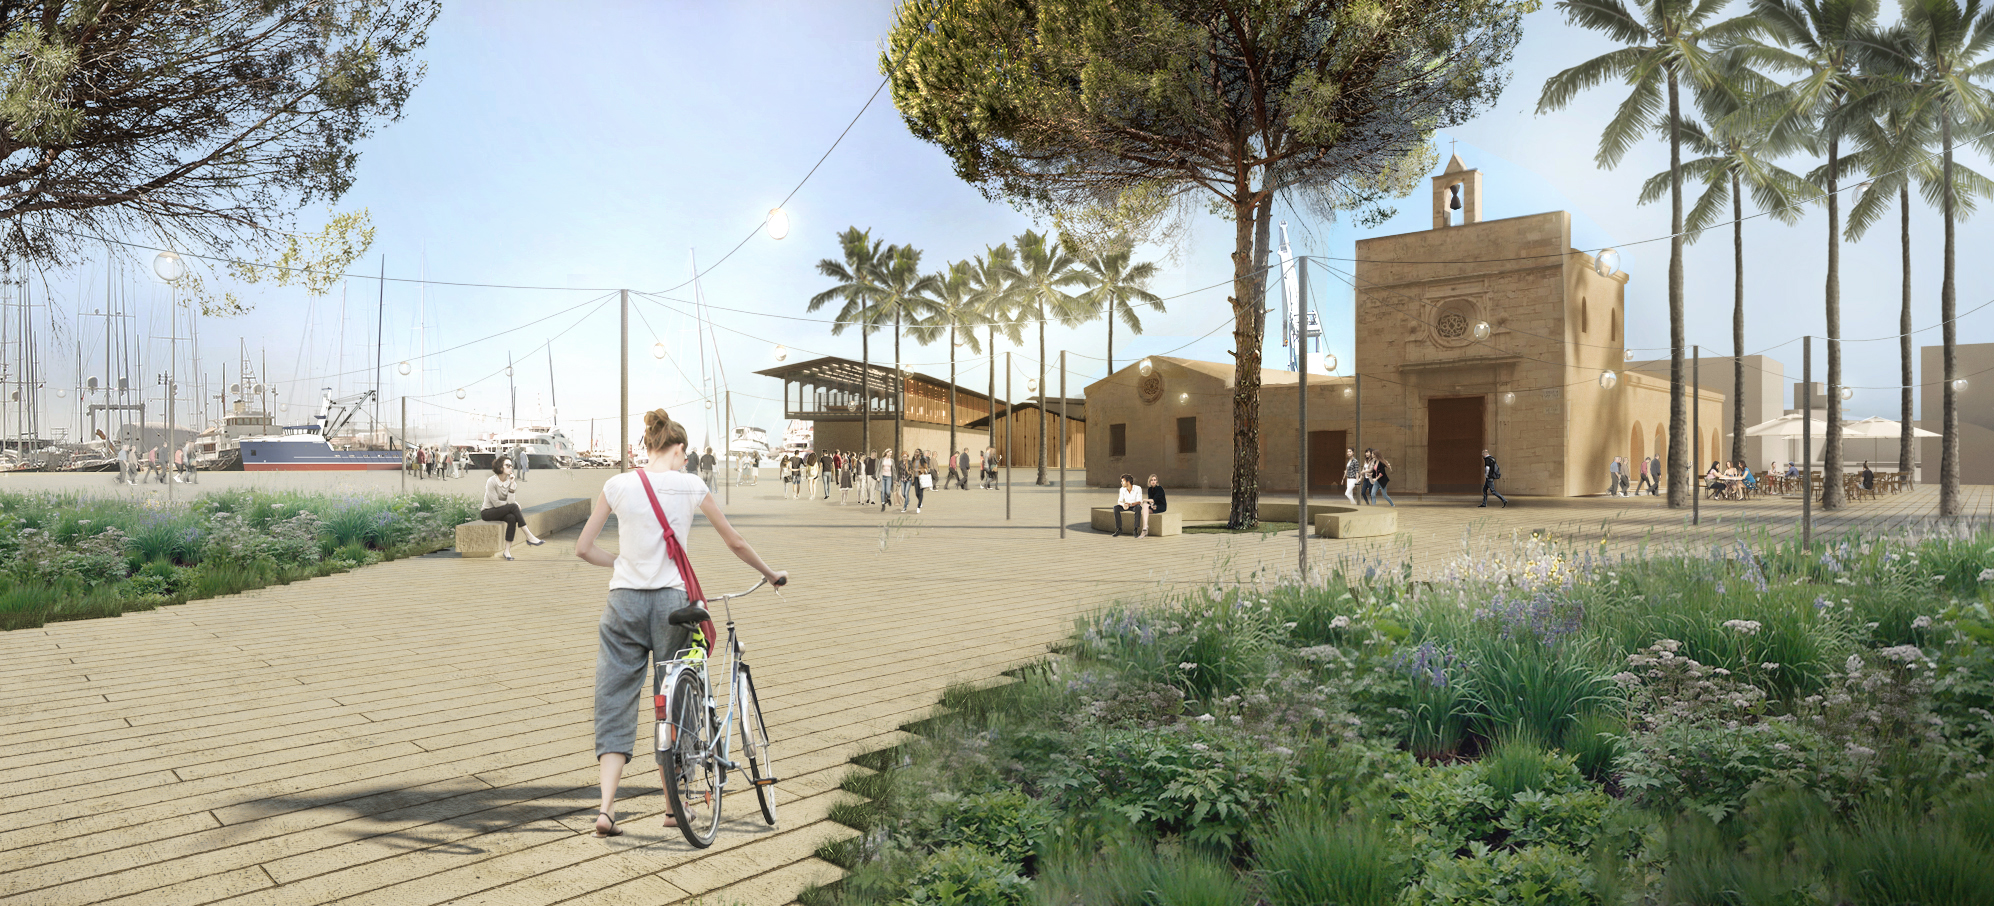 THE APB ASKS UTE ISLA ARQUITECTOS CONTRAMOLLET TO DRAFT THE BASIC PLAN FOR REDEVELOPING THE CONTRAMUELLE-MOLLET AREA AT THE PORT OF PALMA